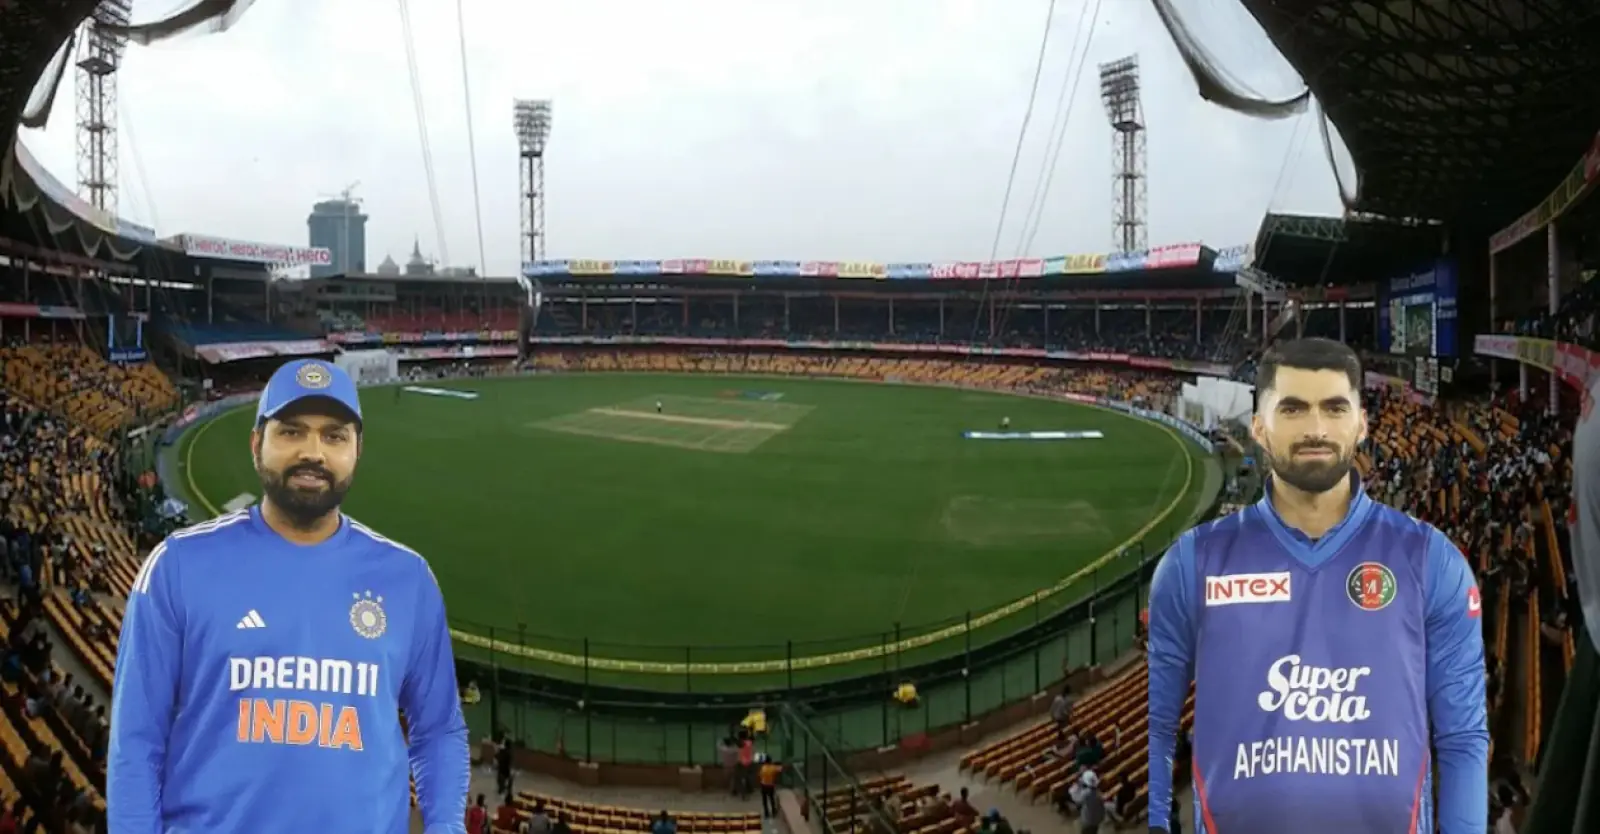 IND vs AFG: India vs Afghanistan last T20 today, know the weather and pitch condition of Bengaluru